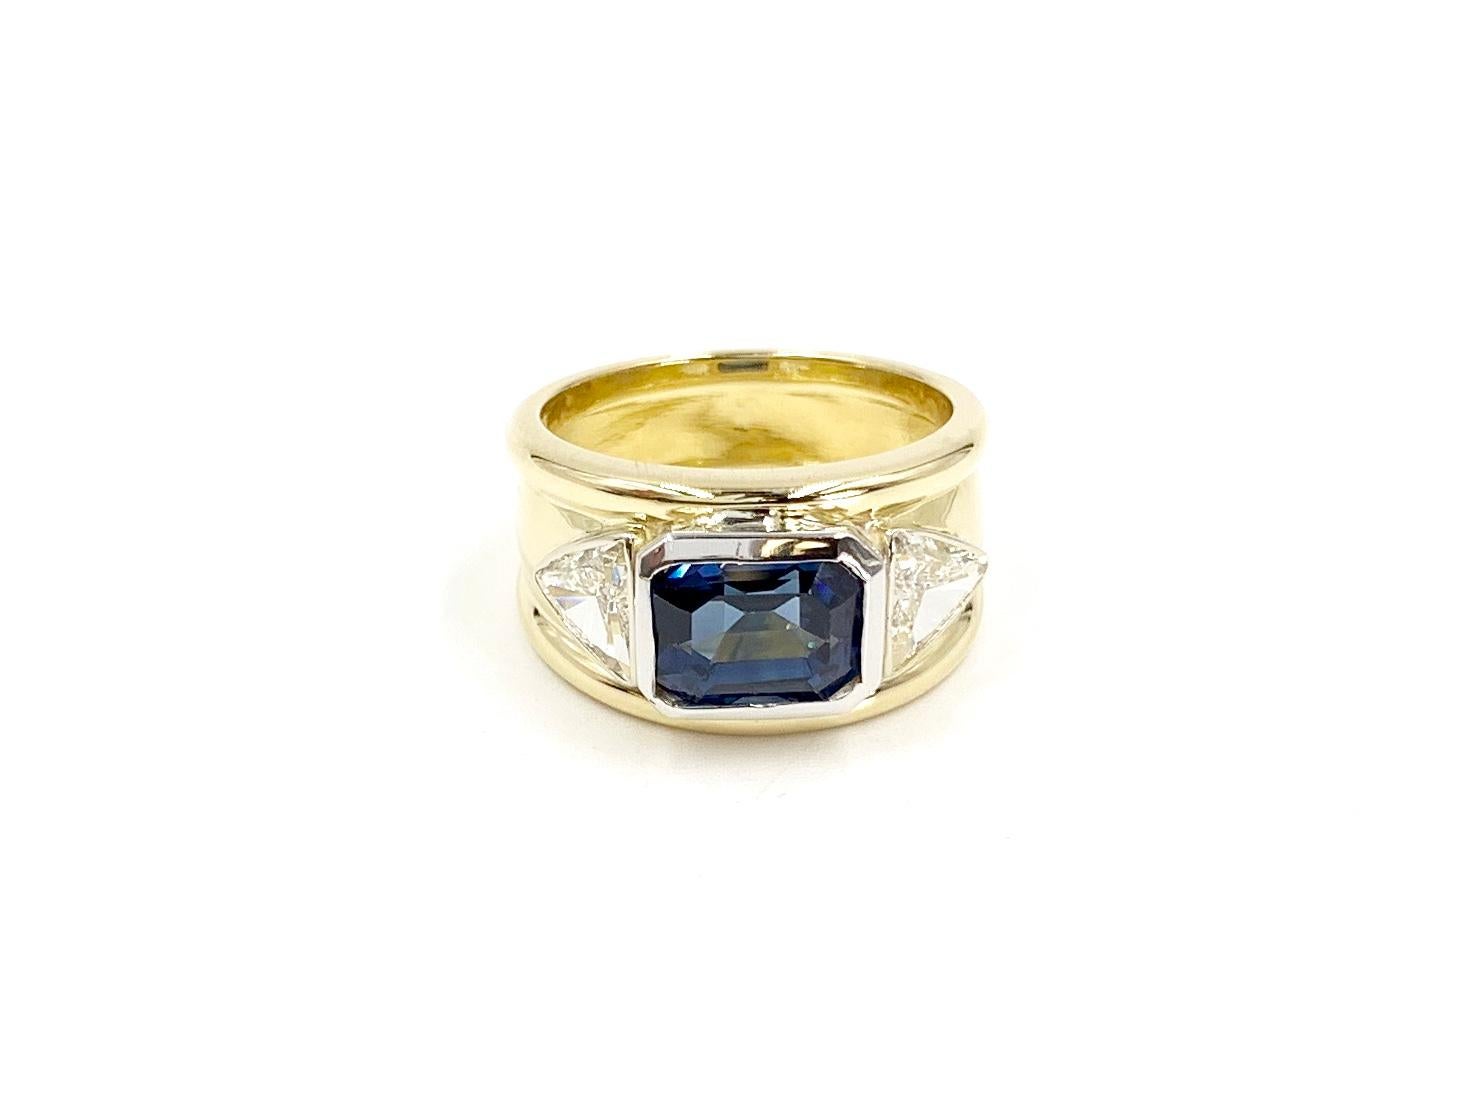 A simple and chic, well made polished 18 karat yellow gold three stone style wide ring featuring a 2.63 carat emerald cut blue sapphire, set horizontally and two white trillion diamonds all beautifully bezel set in platinum. Diamond total weight is